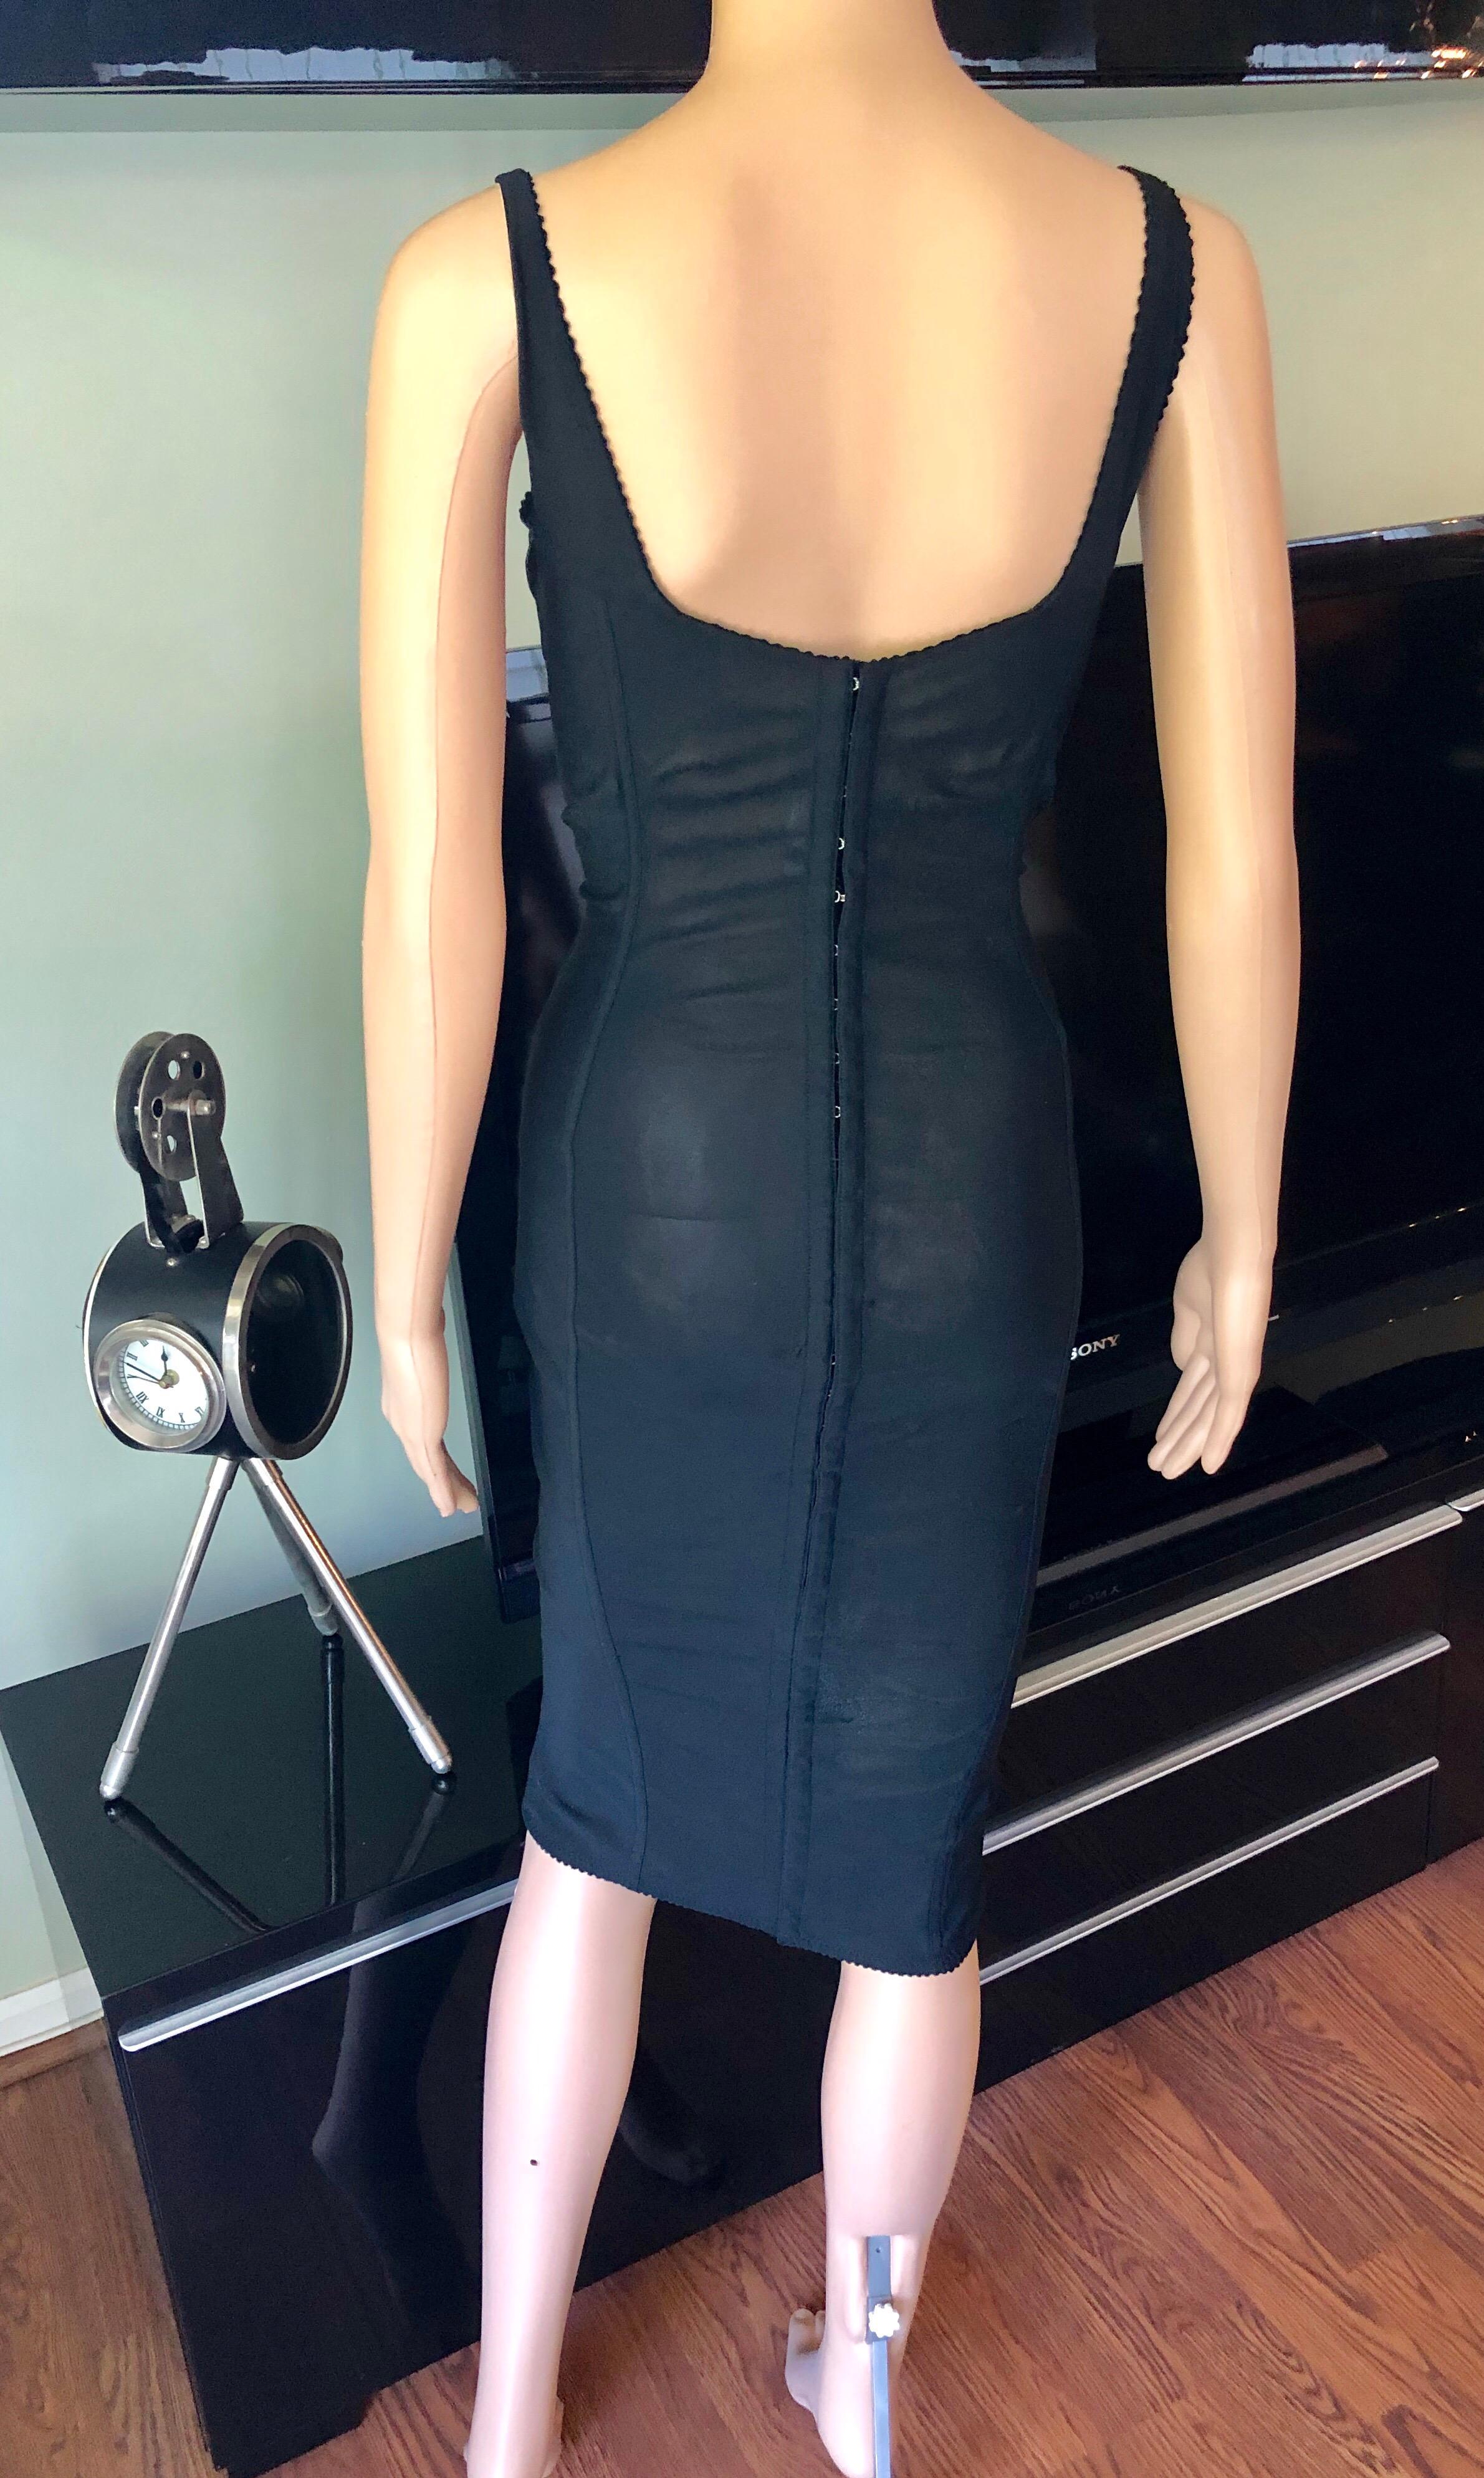 Dolce & Gabbana c.1996 Vintage Corset Lace-Up Bandage Semi Sheer Black Dress In Good Condition For Sale In Naples, FL